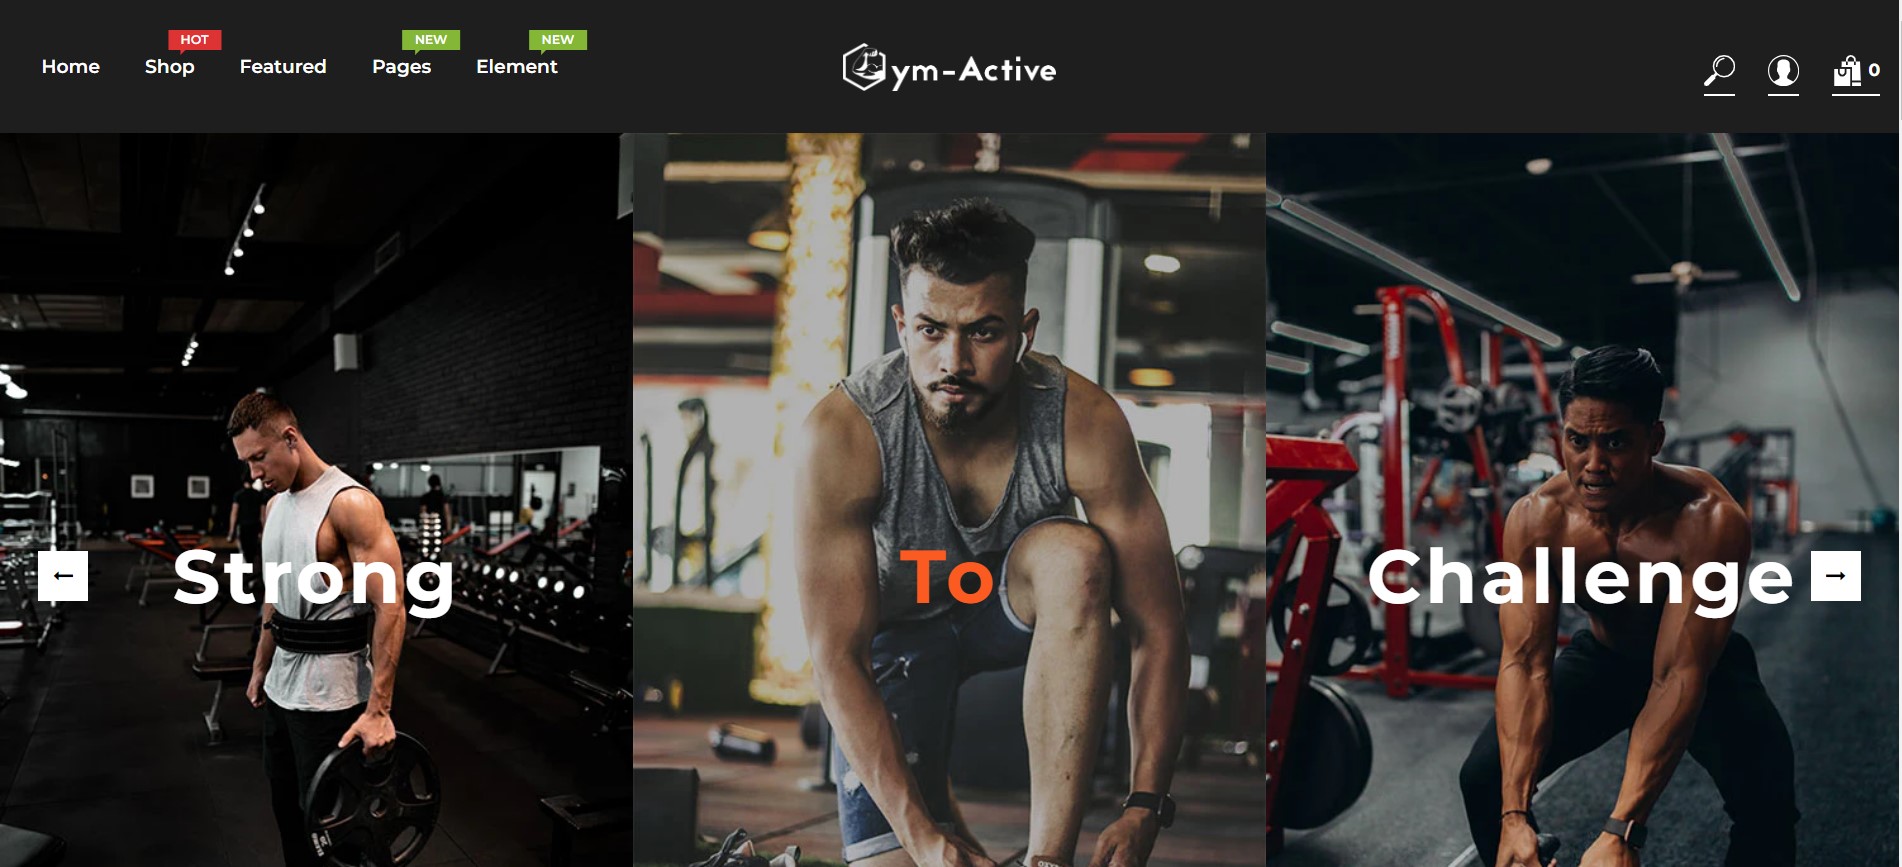 gym-active-sports-clothing-fitness-equipment-shopify-theme